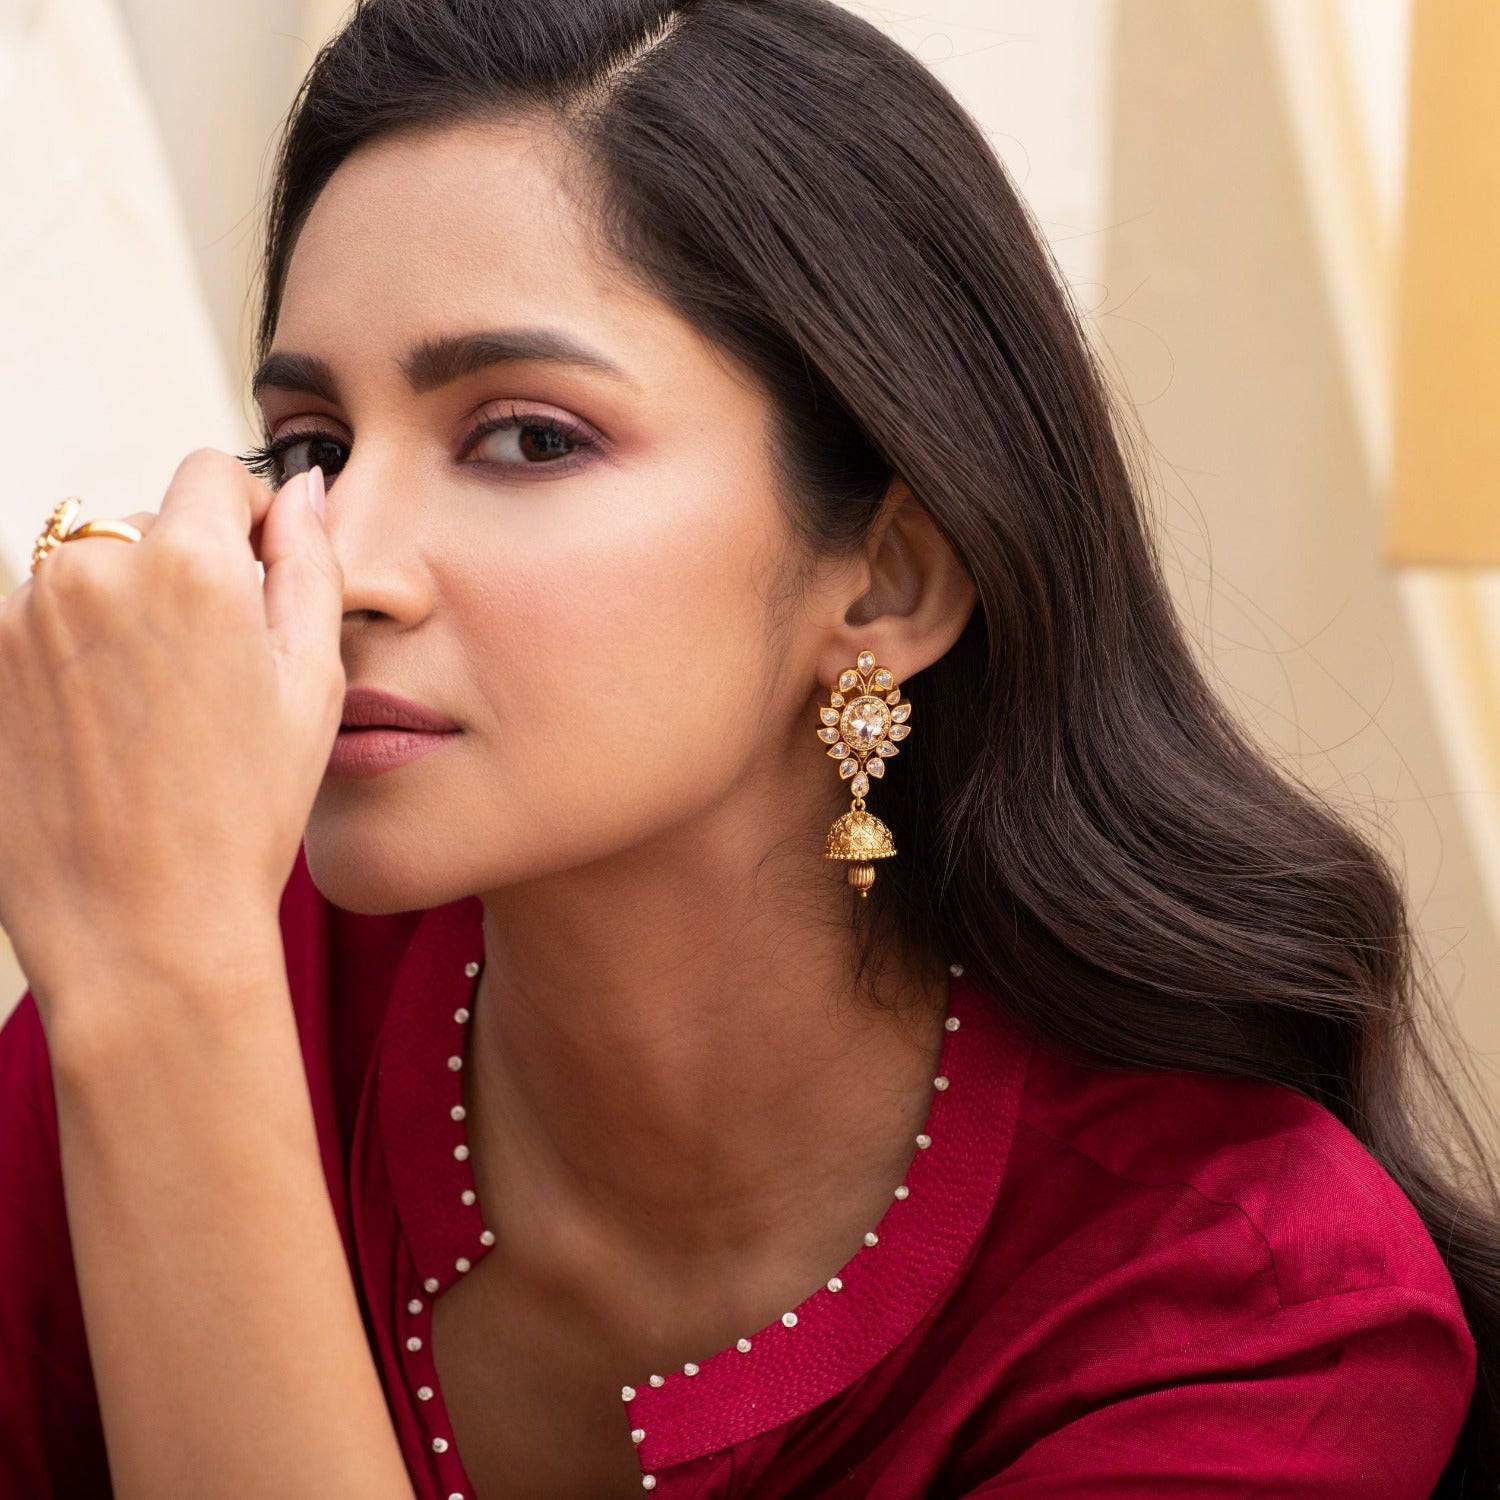 With These Beautiful Jhumkas, Your Every Ethnic Look Will Be On Point